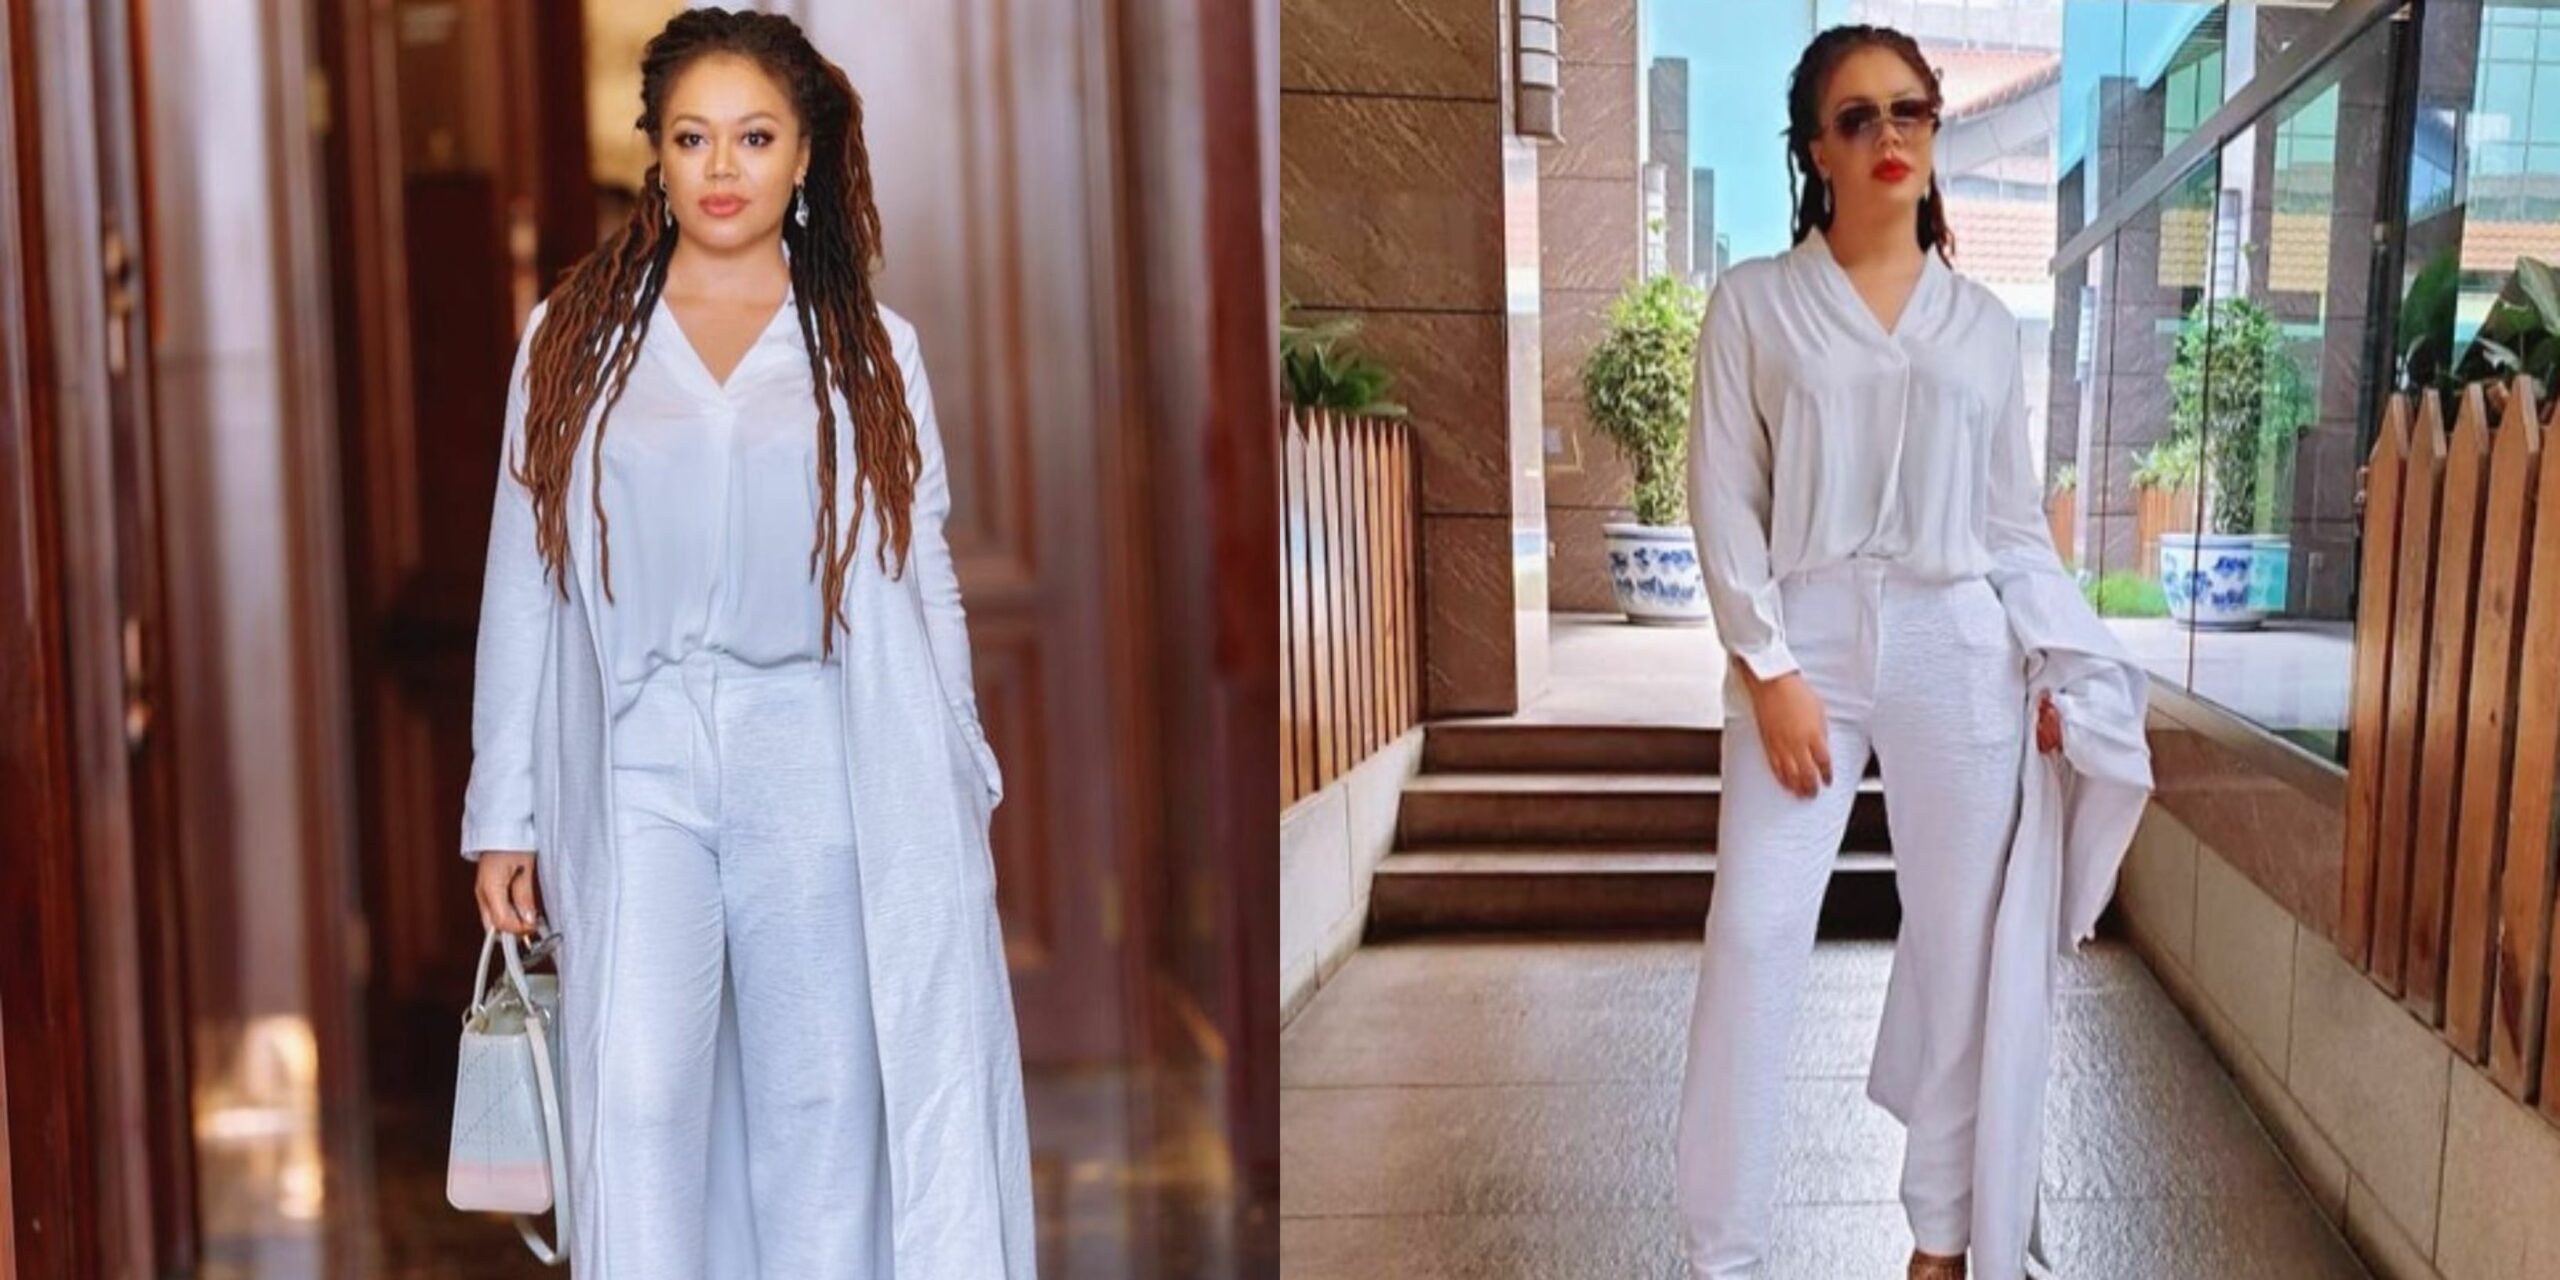 Nadia Buari causes stir as she appears very, very slim in new photos